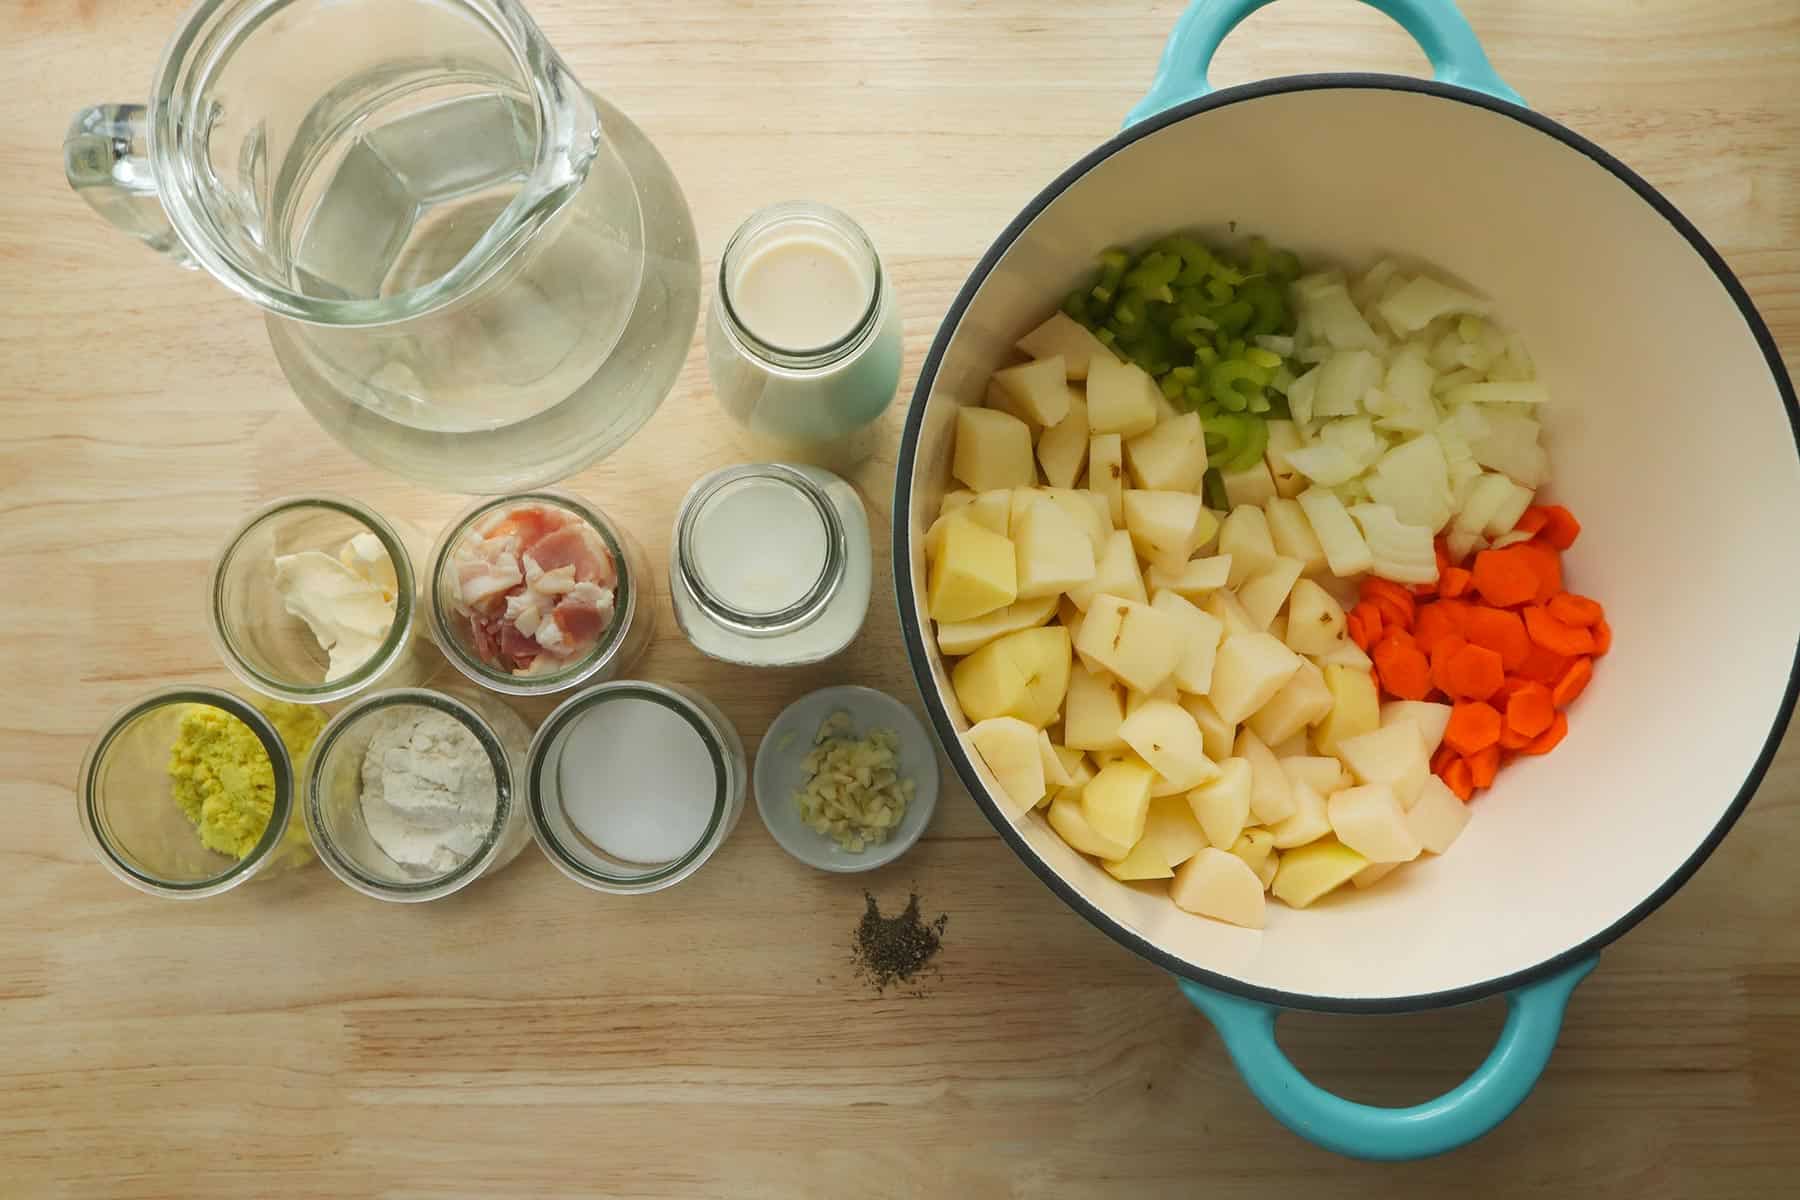 All the ingredients needed for potato soup.